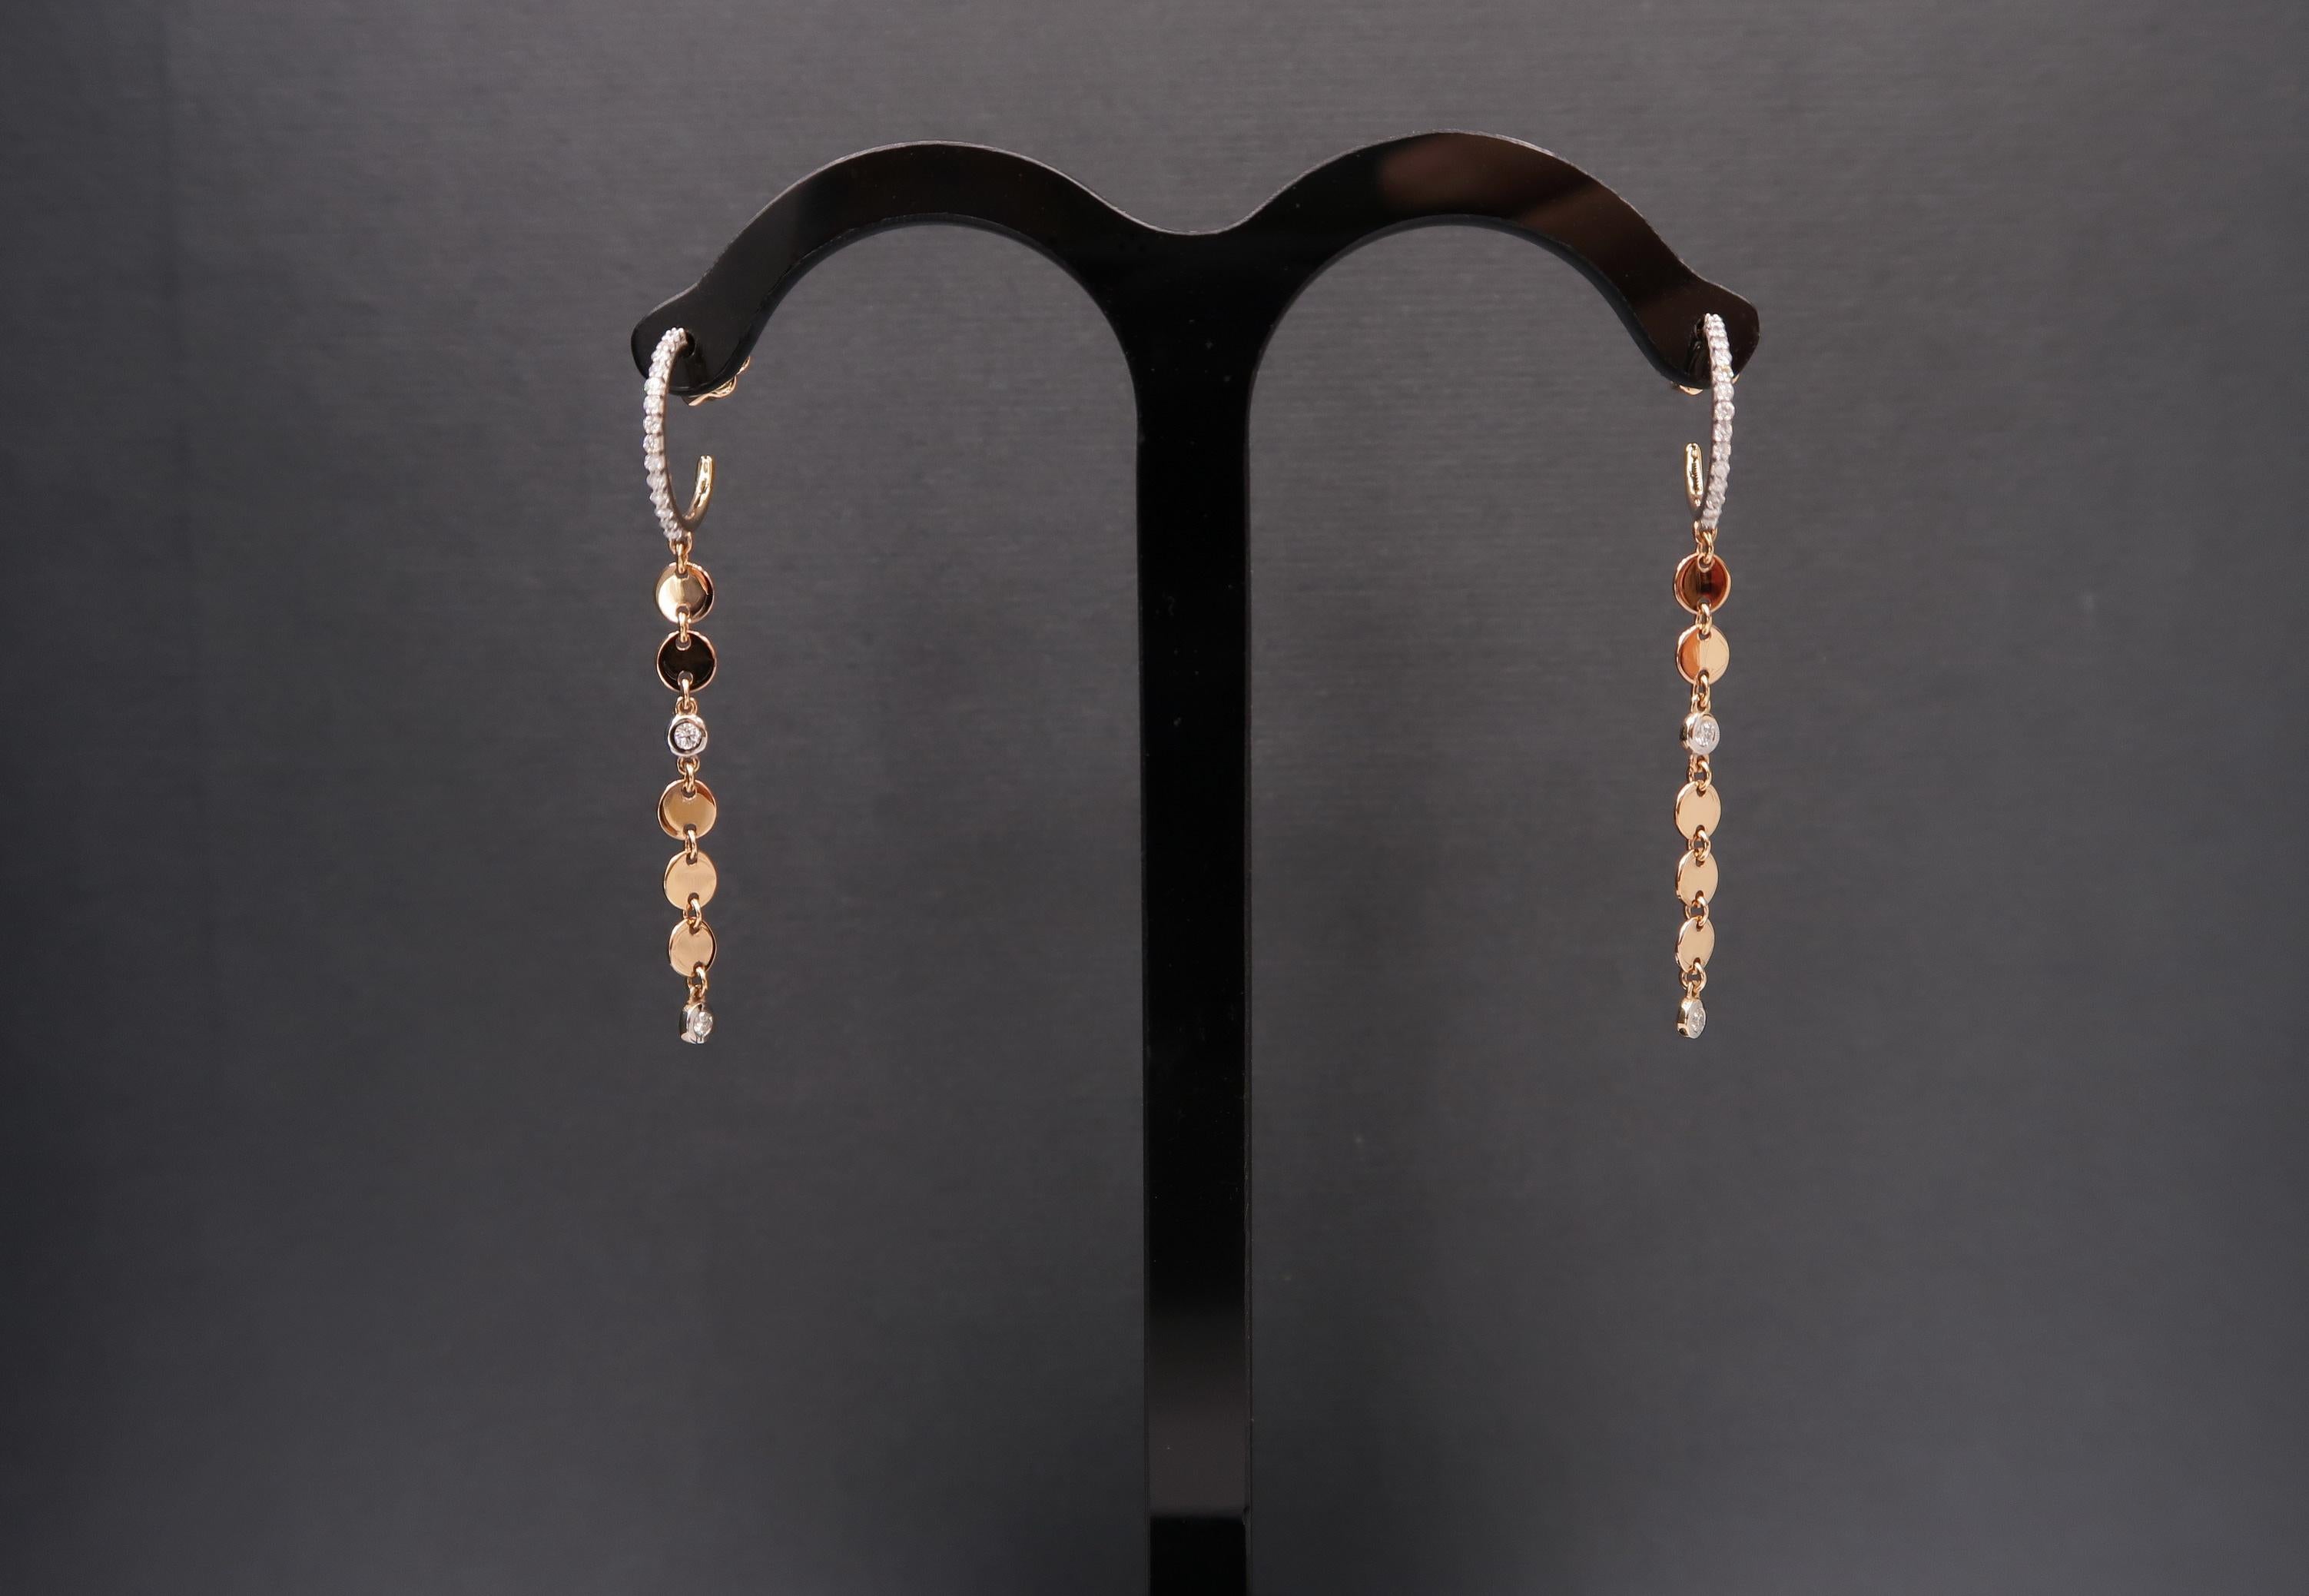 Diamond Hoop Earrings in 18K Rose Gold with Dangling Sequins

Gold: 18K Rose Gold, 3.93 g
Diamond: 0.22 ct

Length: 2 inches